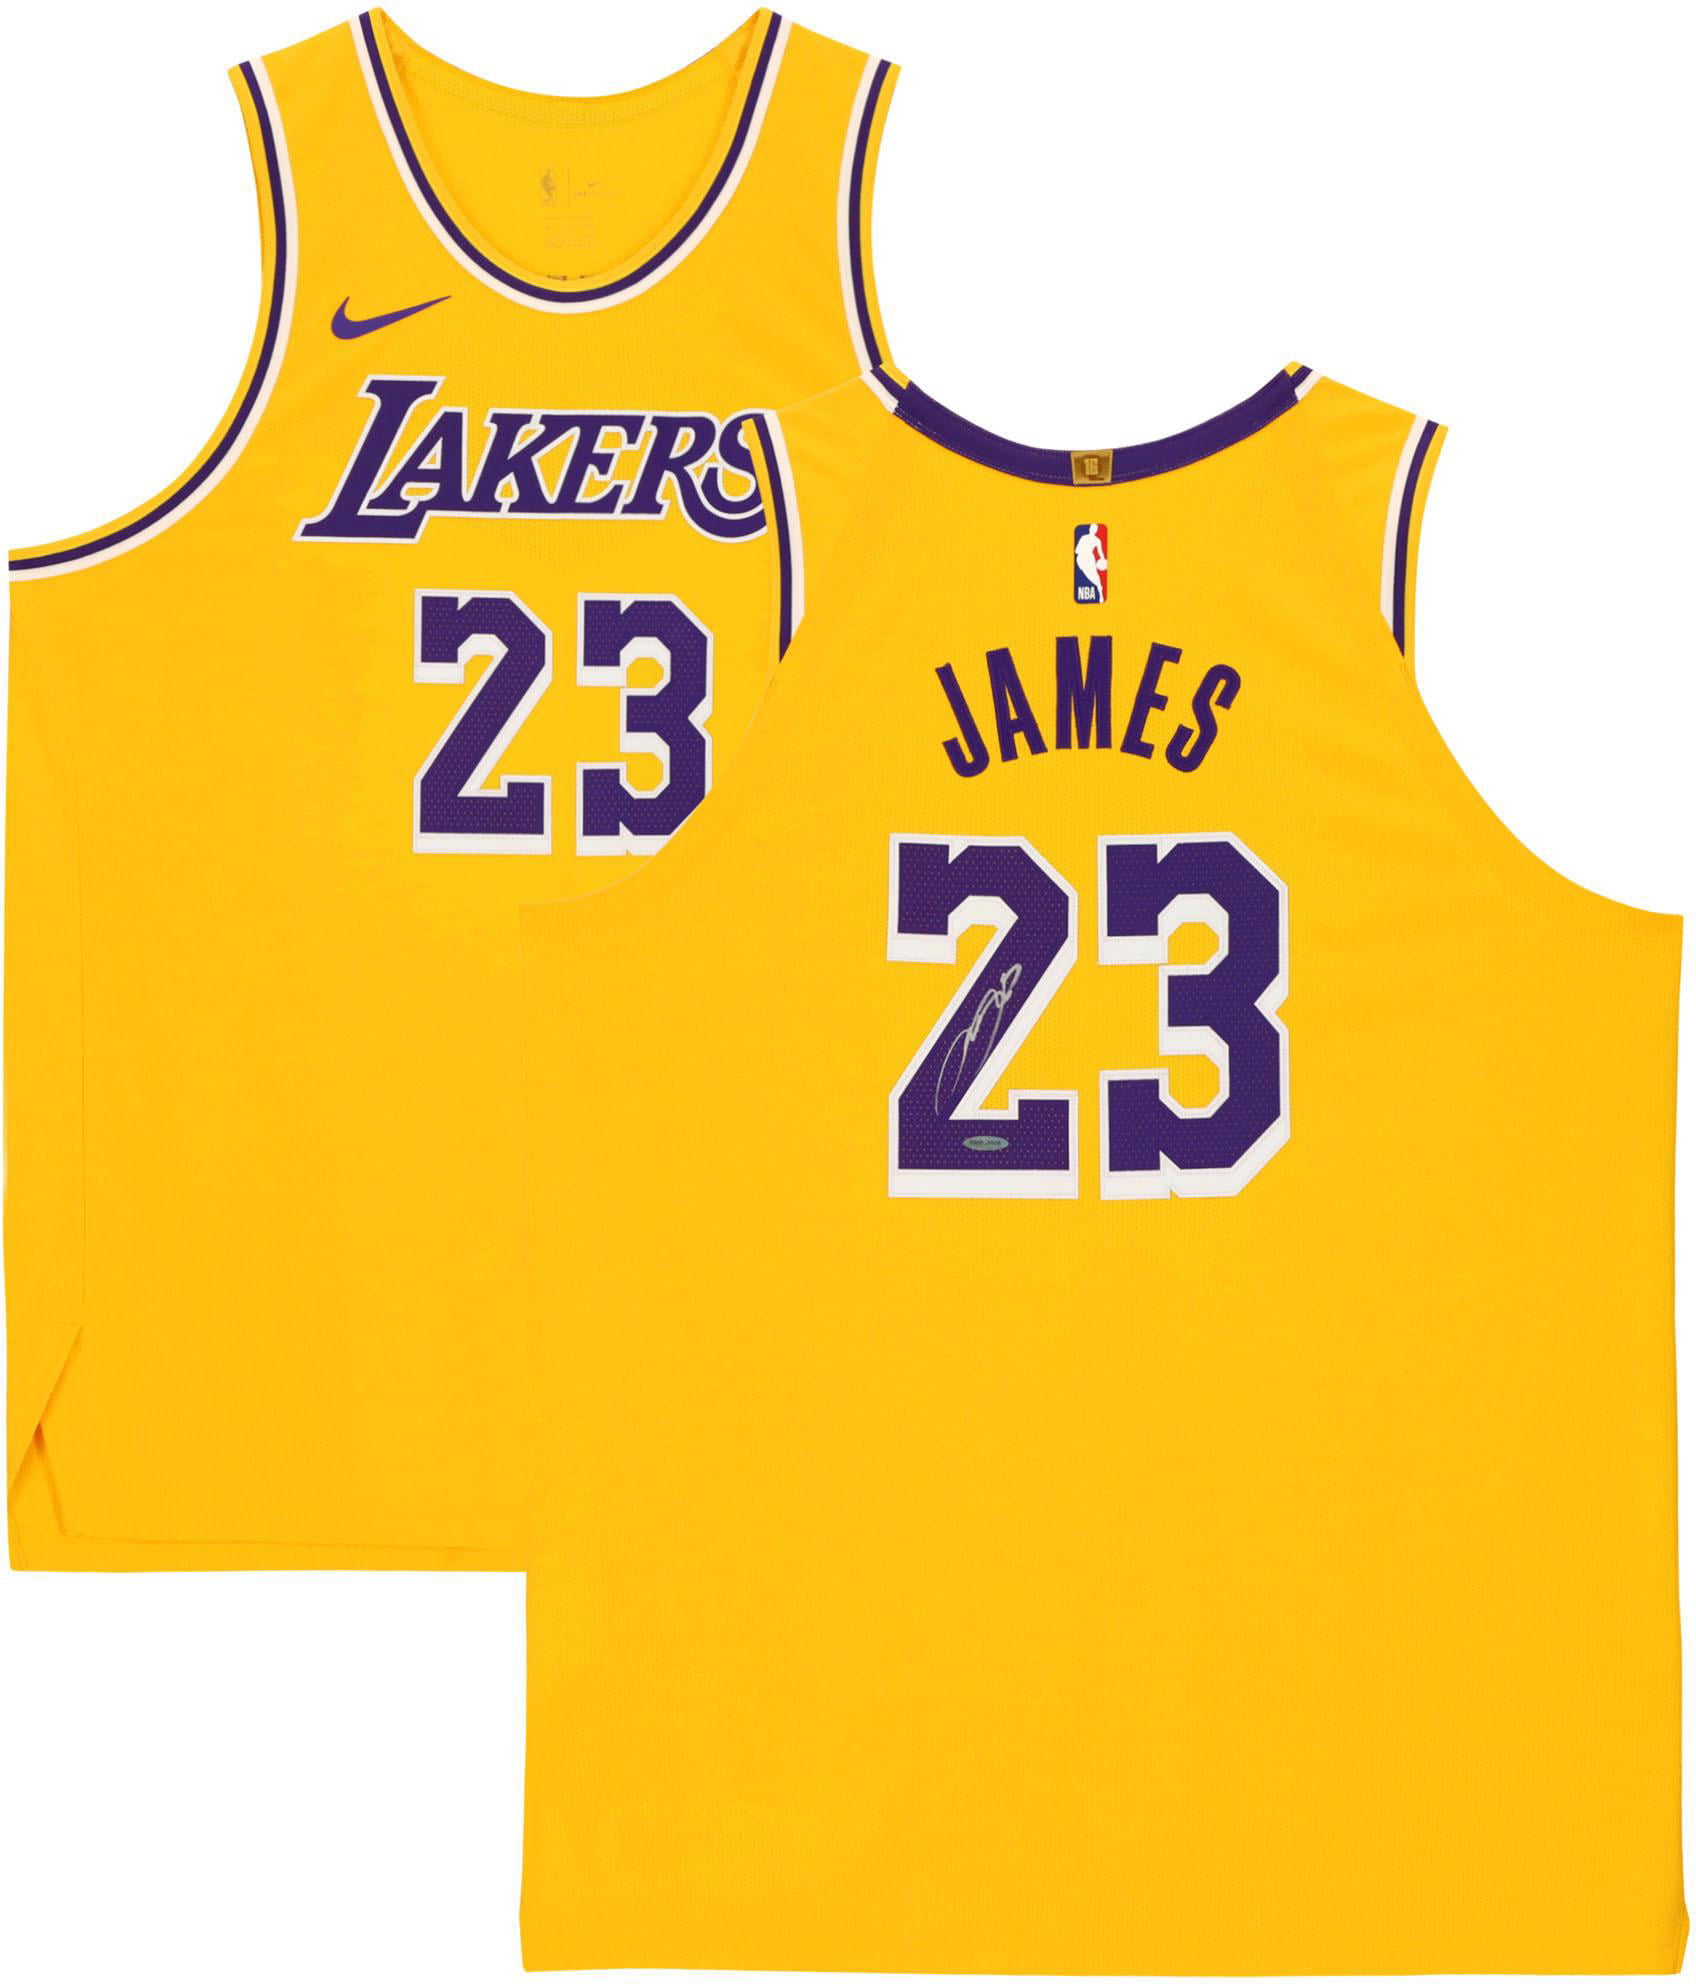 LeBron James Los Angeles Lakers Autographed Gold Jersey - Upper Deck - Fanatics Authentic Certified